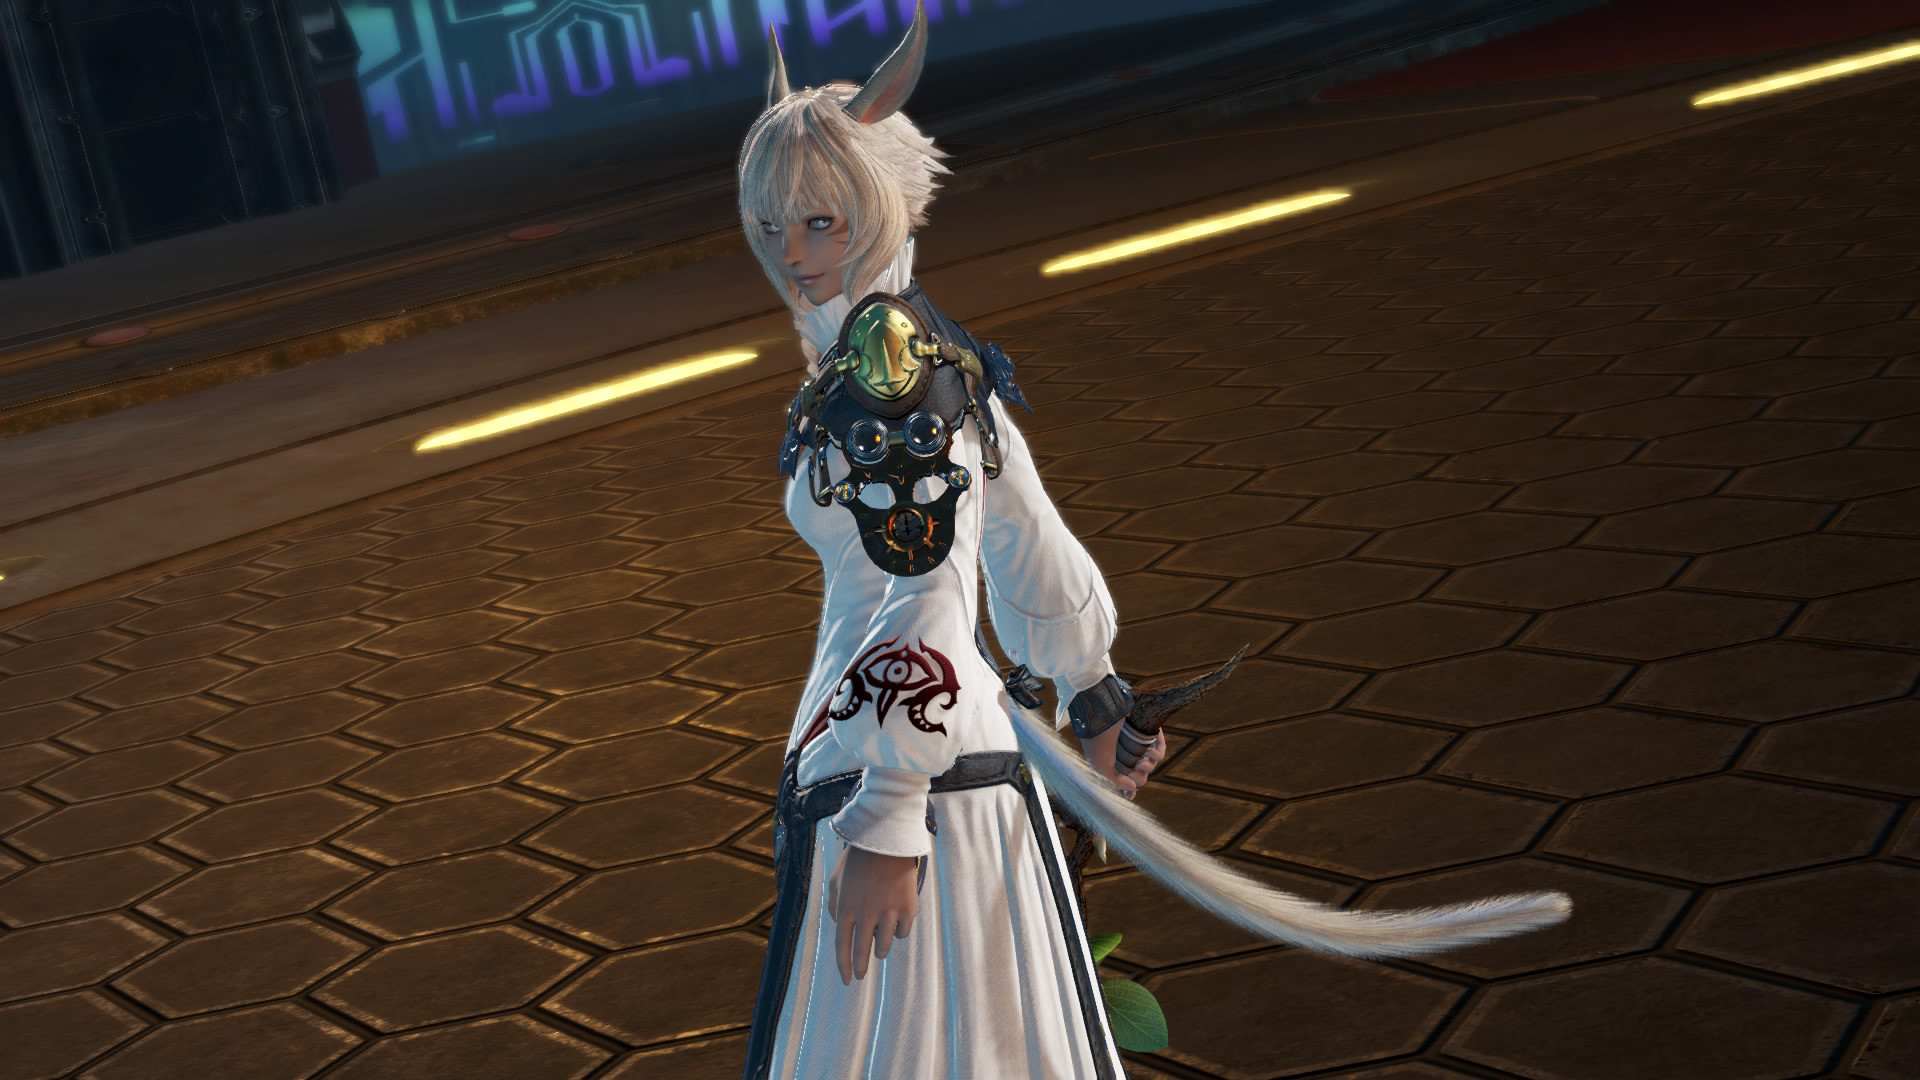 DFF NT: Scion Healer's Robe Appearance Set for Y'shtola Featured Screenshot #1